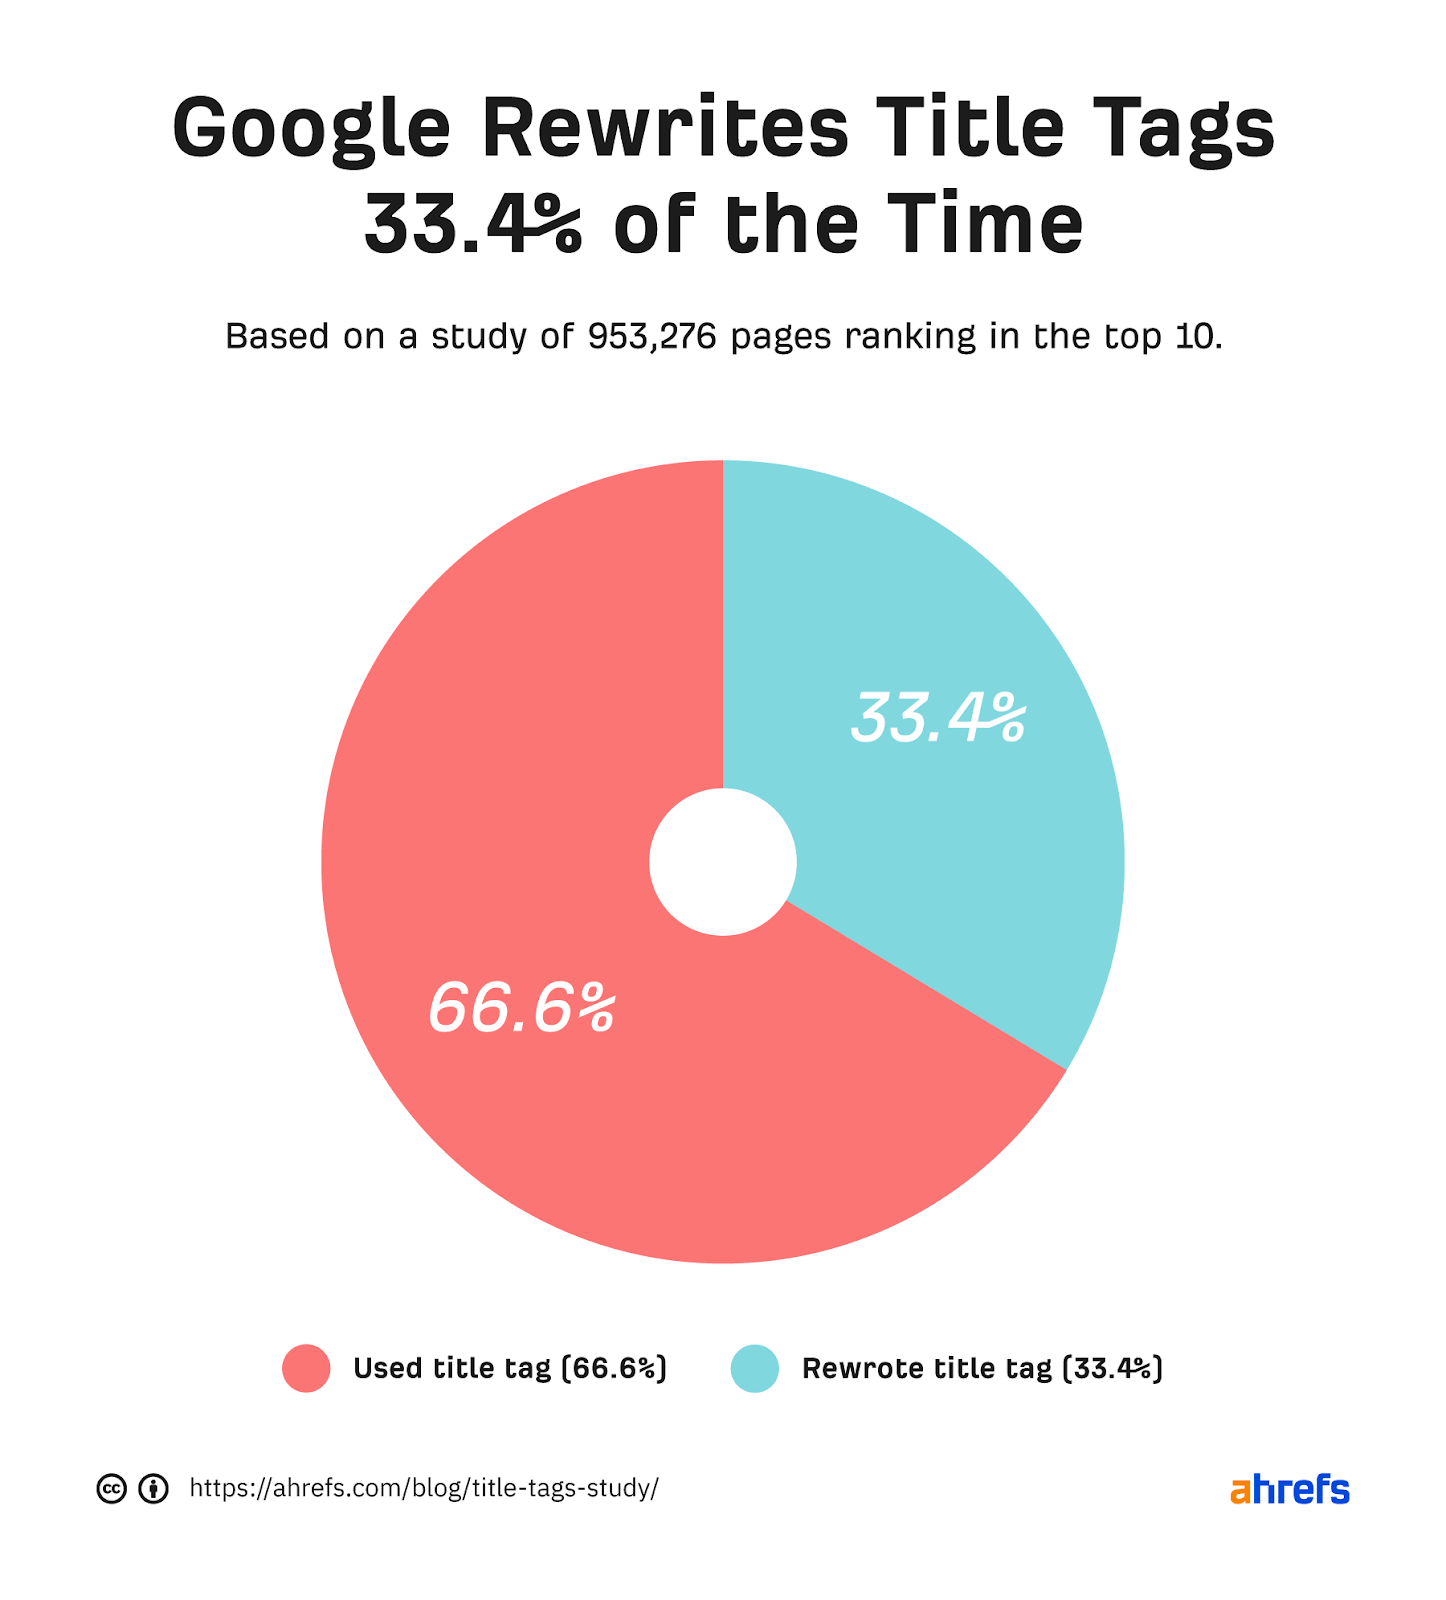 Pie-chart showing the percentage of title tags Google rewrites